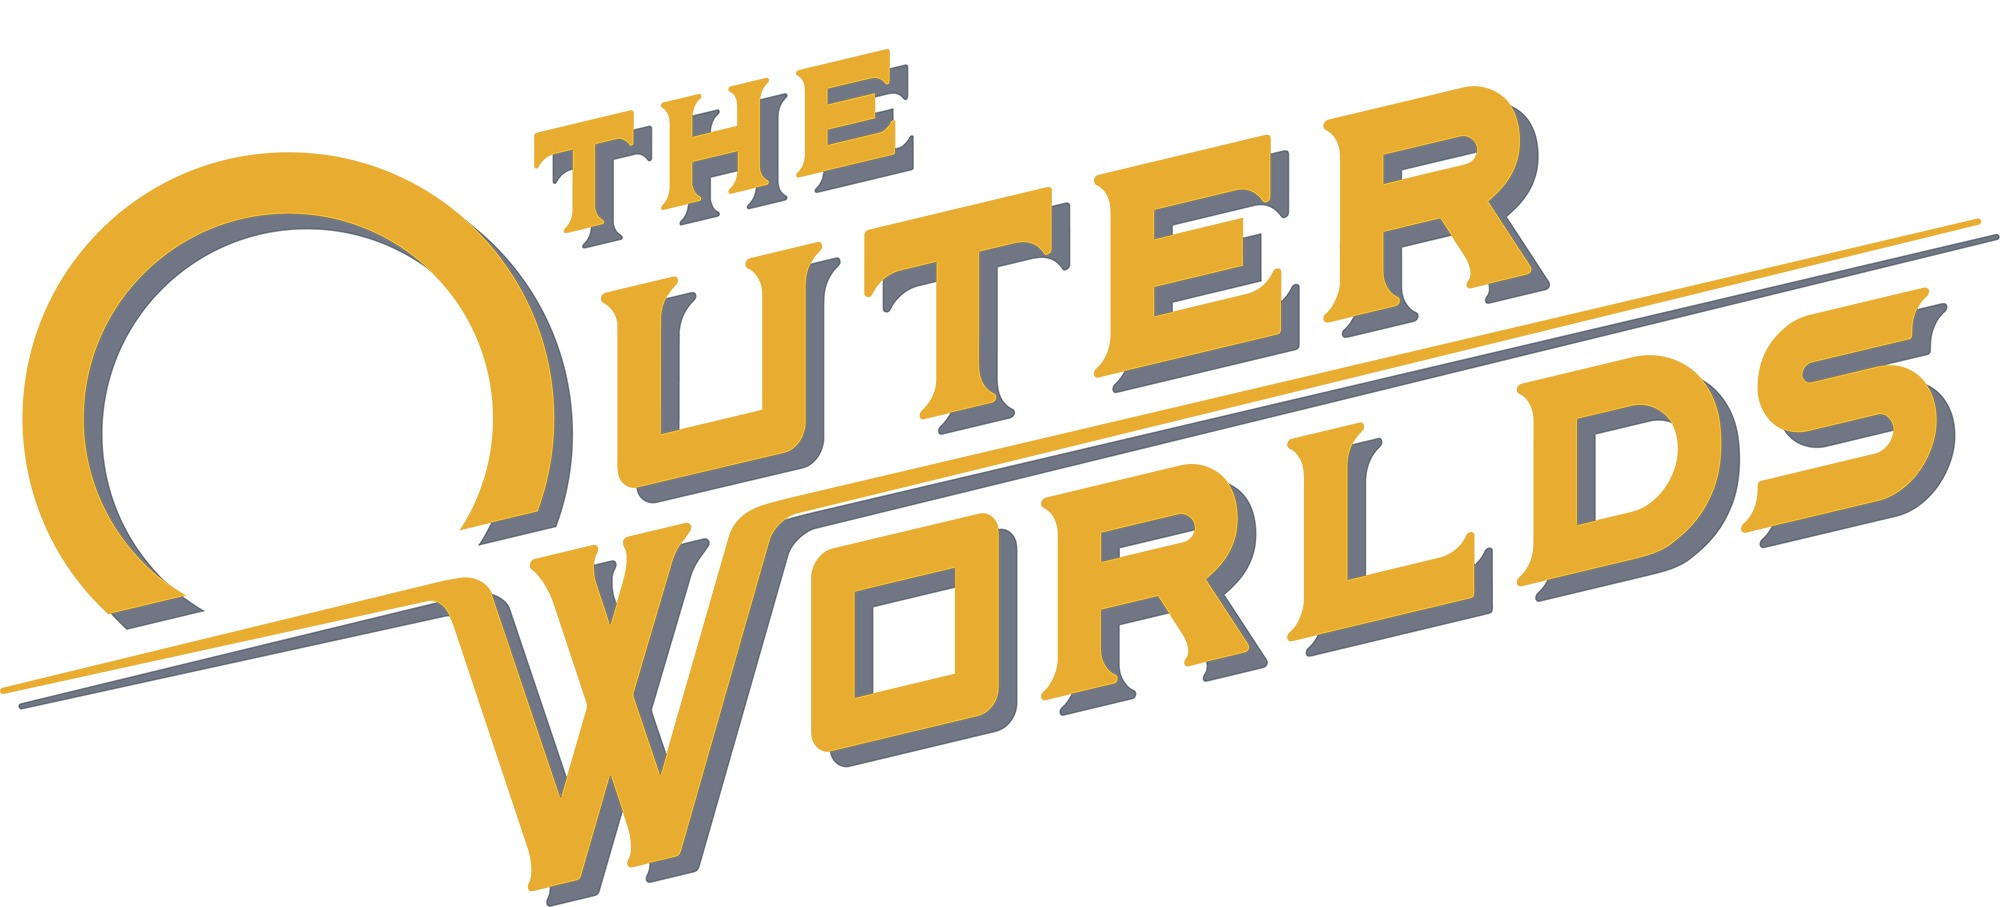 The Outer Worlds – logo